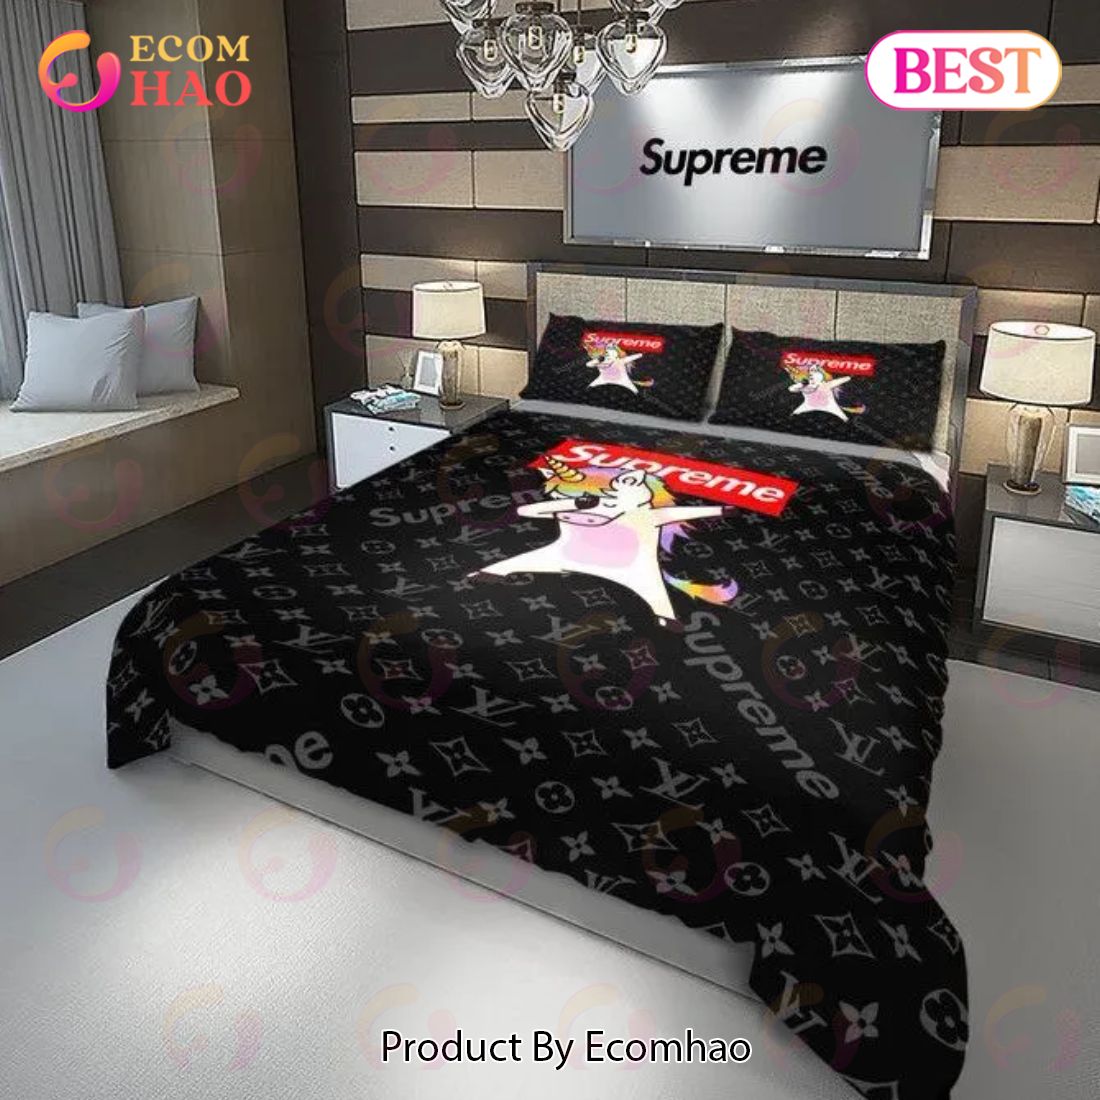 Louis Vuitton Supreme Red Bedding Sets Bedroom Sets, Bed Sheets Twin, Full,  Queen, King Size